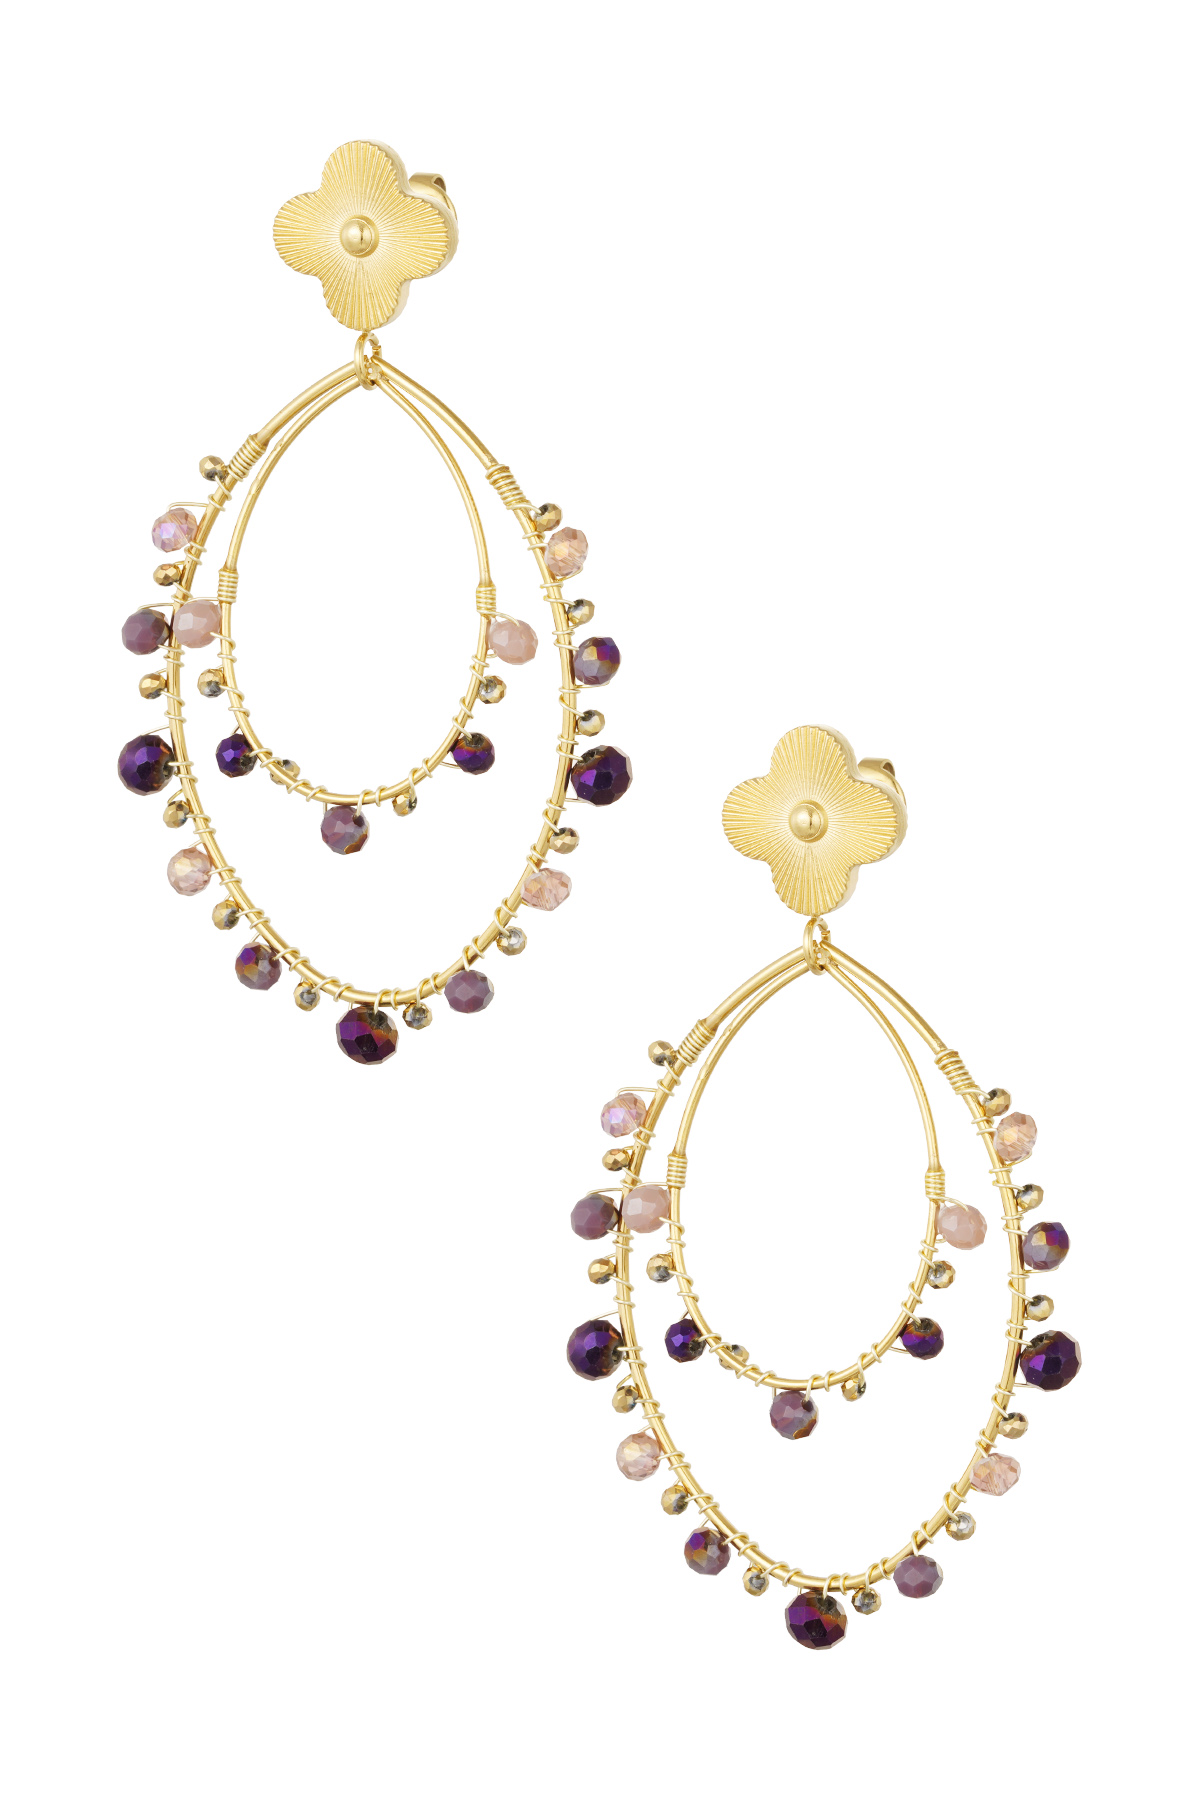 Oval earrings with beads - gold/purple h5 